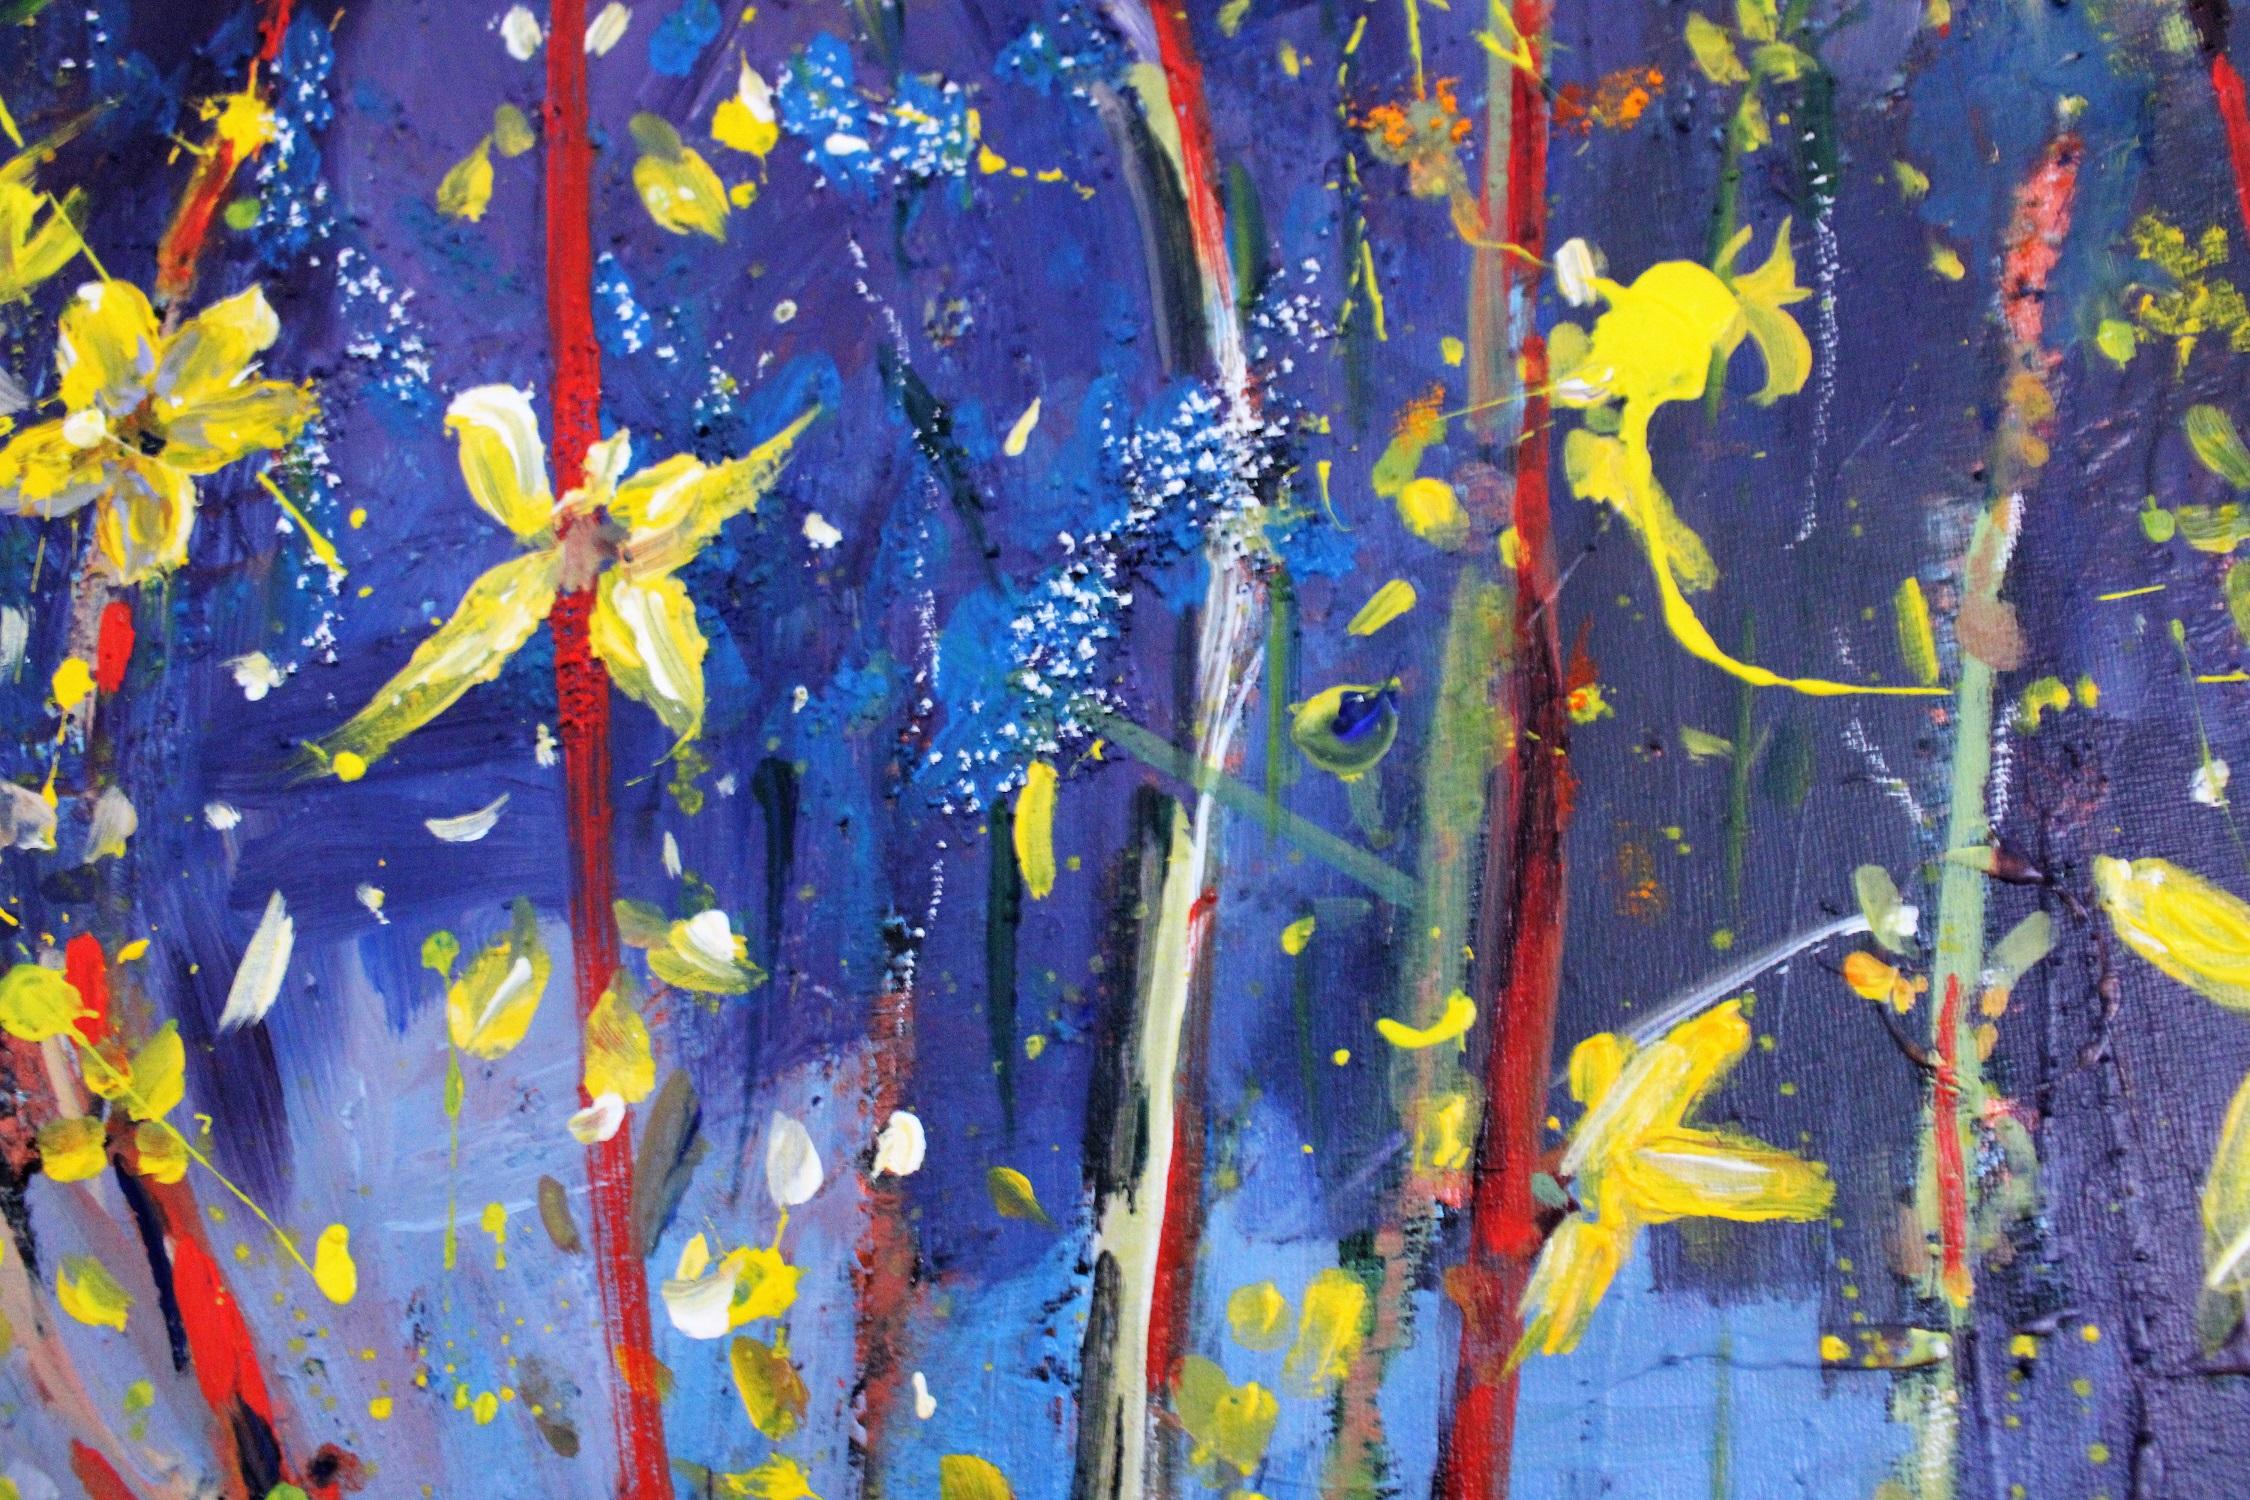 Linda Clerget's abstract and floral paintings are a journey into nature and the imagination. With vivid colors and clean shapes, these paintings transport you to a dreamlike world and invite you to contemplate. Inspired by flowers, these artworks